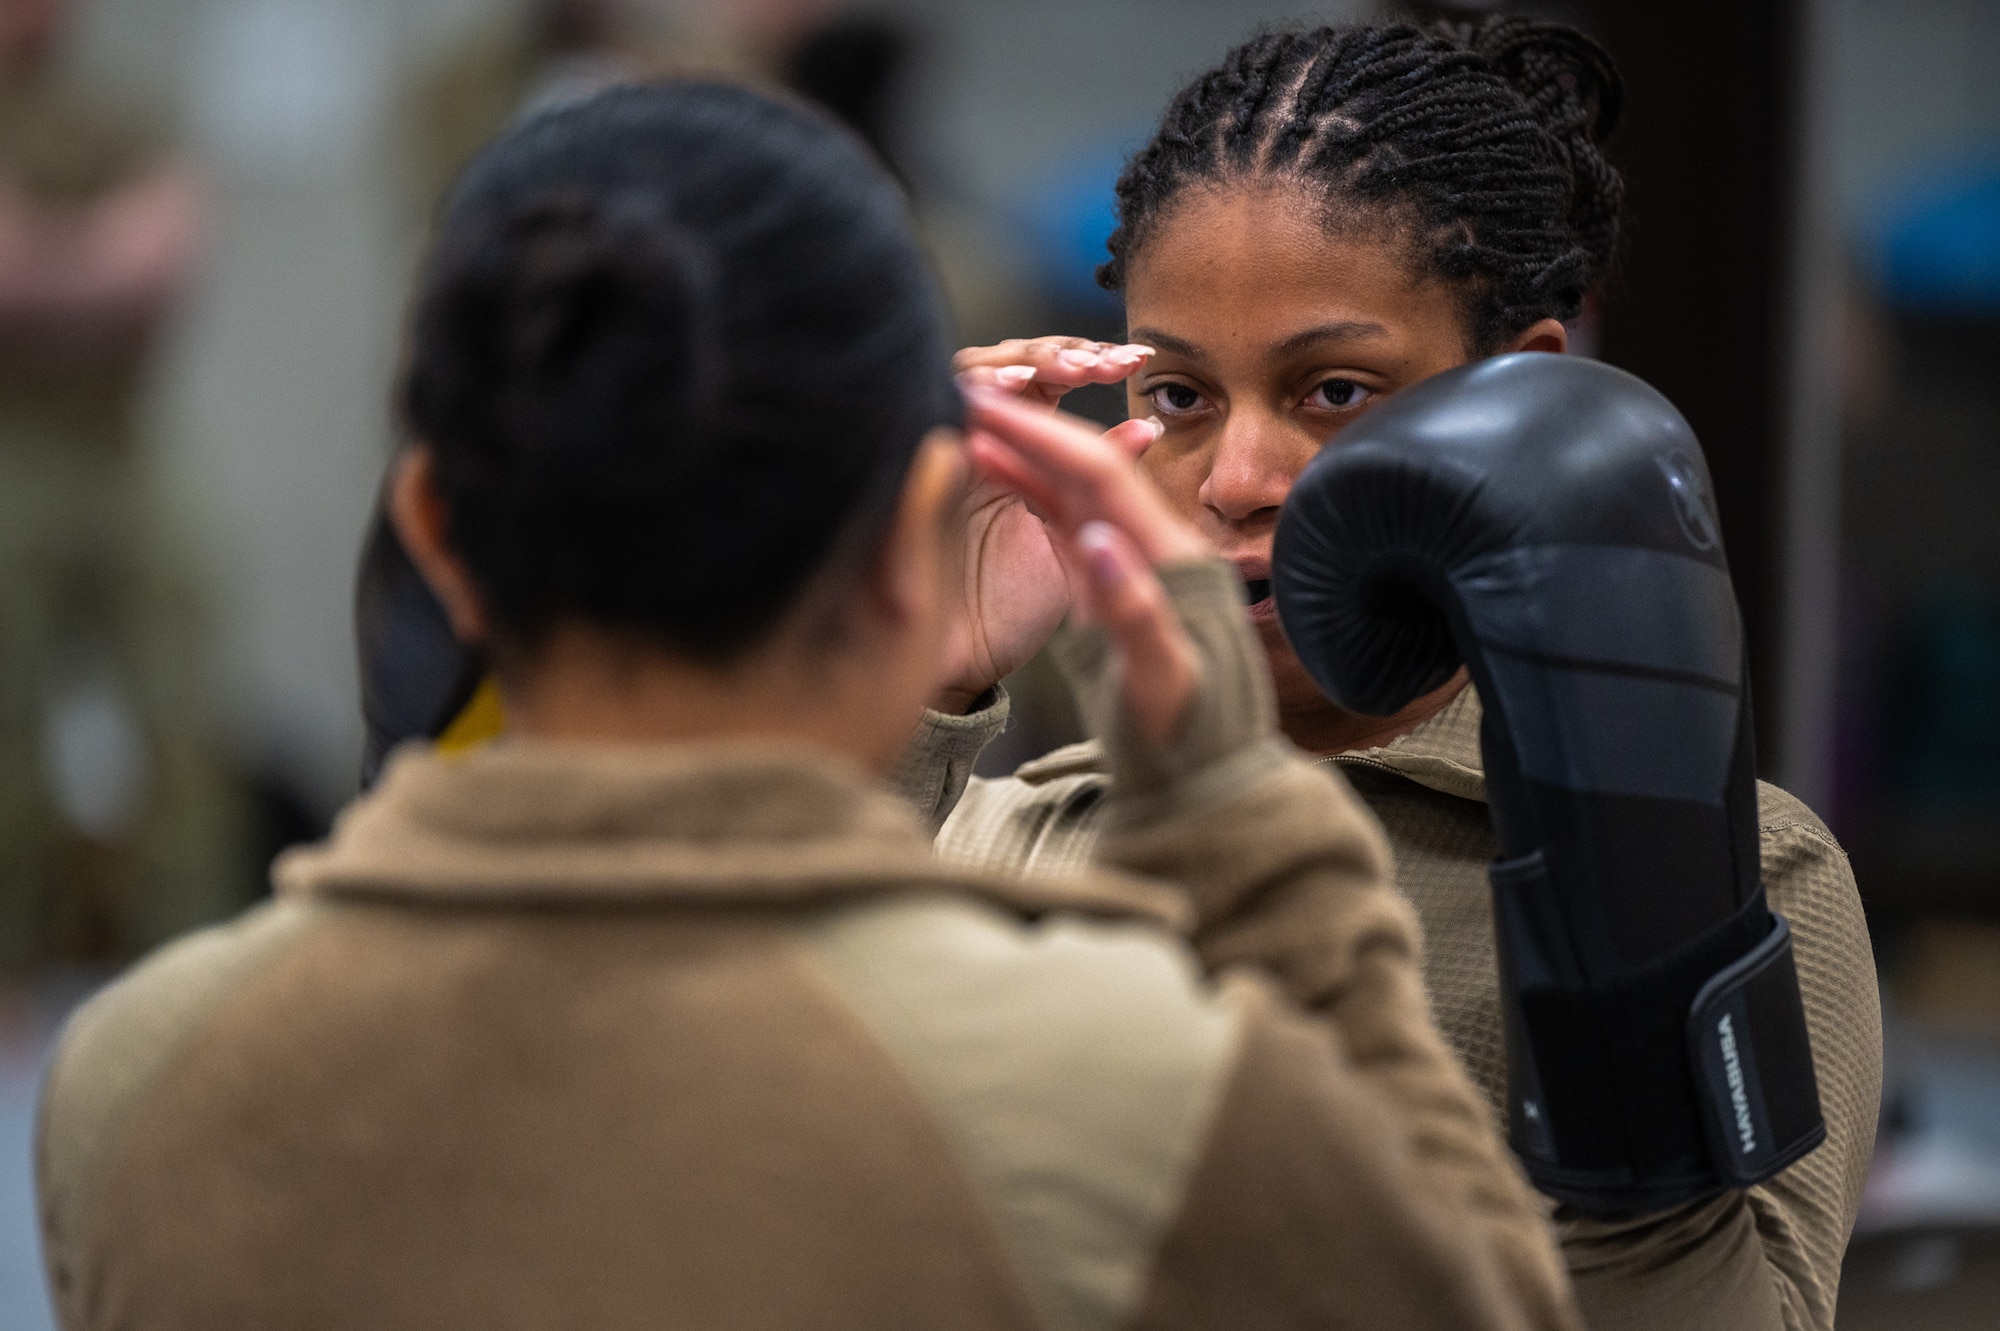 U.S. Air Force Senior Airman Jeanette Casiano, 621st Air Control Squadron weapons director, left, and Senior Airman Breyon Kamoze, 621st ACS battle management operator, participate in a training exercise together during a combatives instructor certification course at Osan Air Base, Republic of Korea, Feb. 23, 2024. The 621st ACS intends to utilize this skill for the operational needs of their unit. They are also capable of instructing members from the 51st Fighter Wing at a later date. The 621st ACS impacts the “Fight Tonight” mission by supporting training and contingency operations of the 51st Fighter Wing, providing lethal tactical battle management for the Air Component Commander during armistice and war. (U.S. Air Force photo by Airman 1st Class Chase Verzaal)